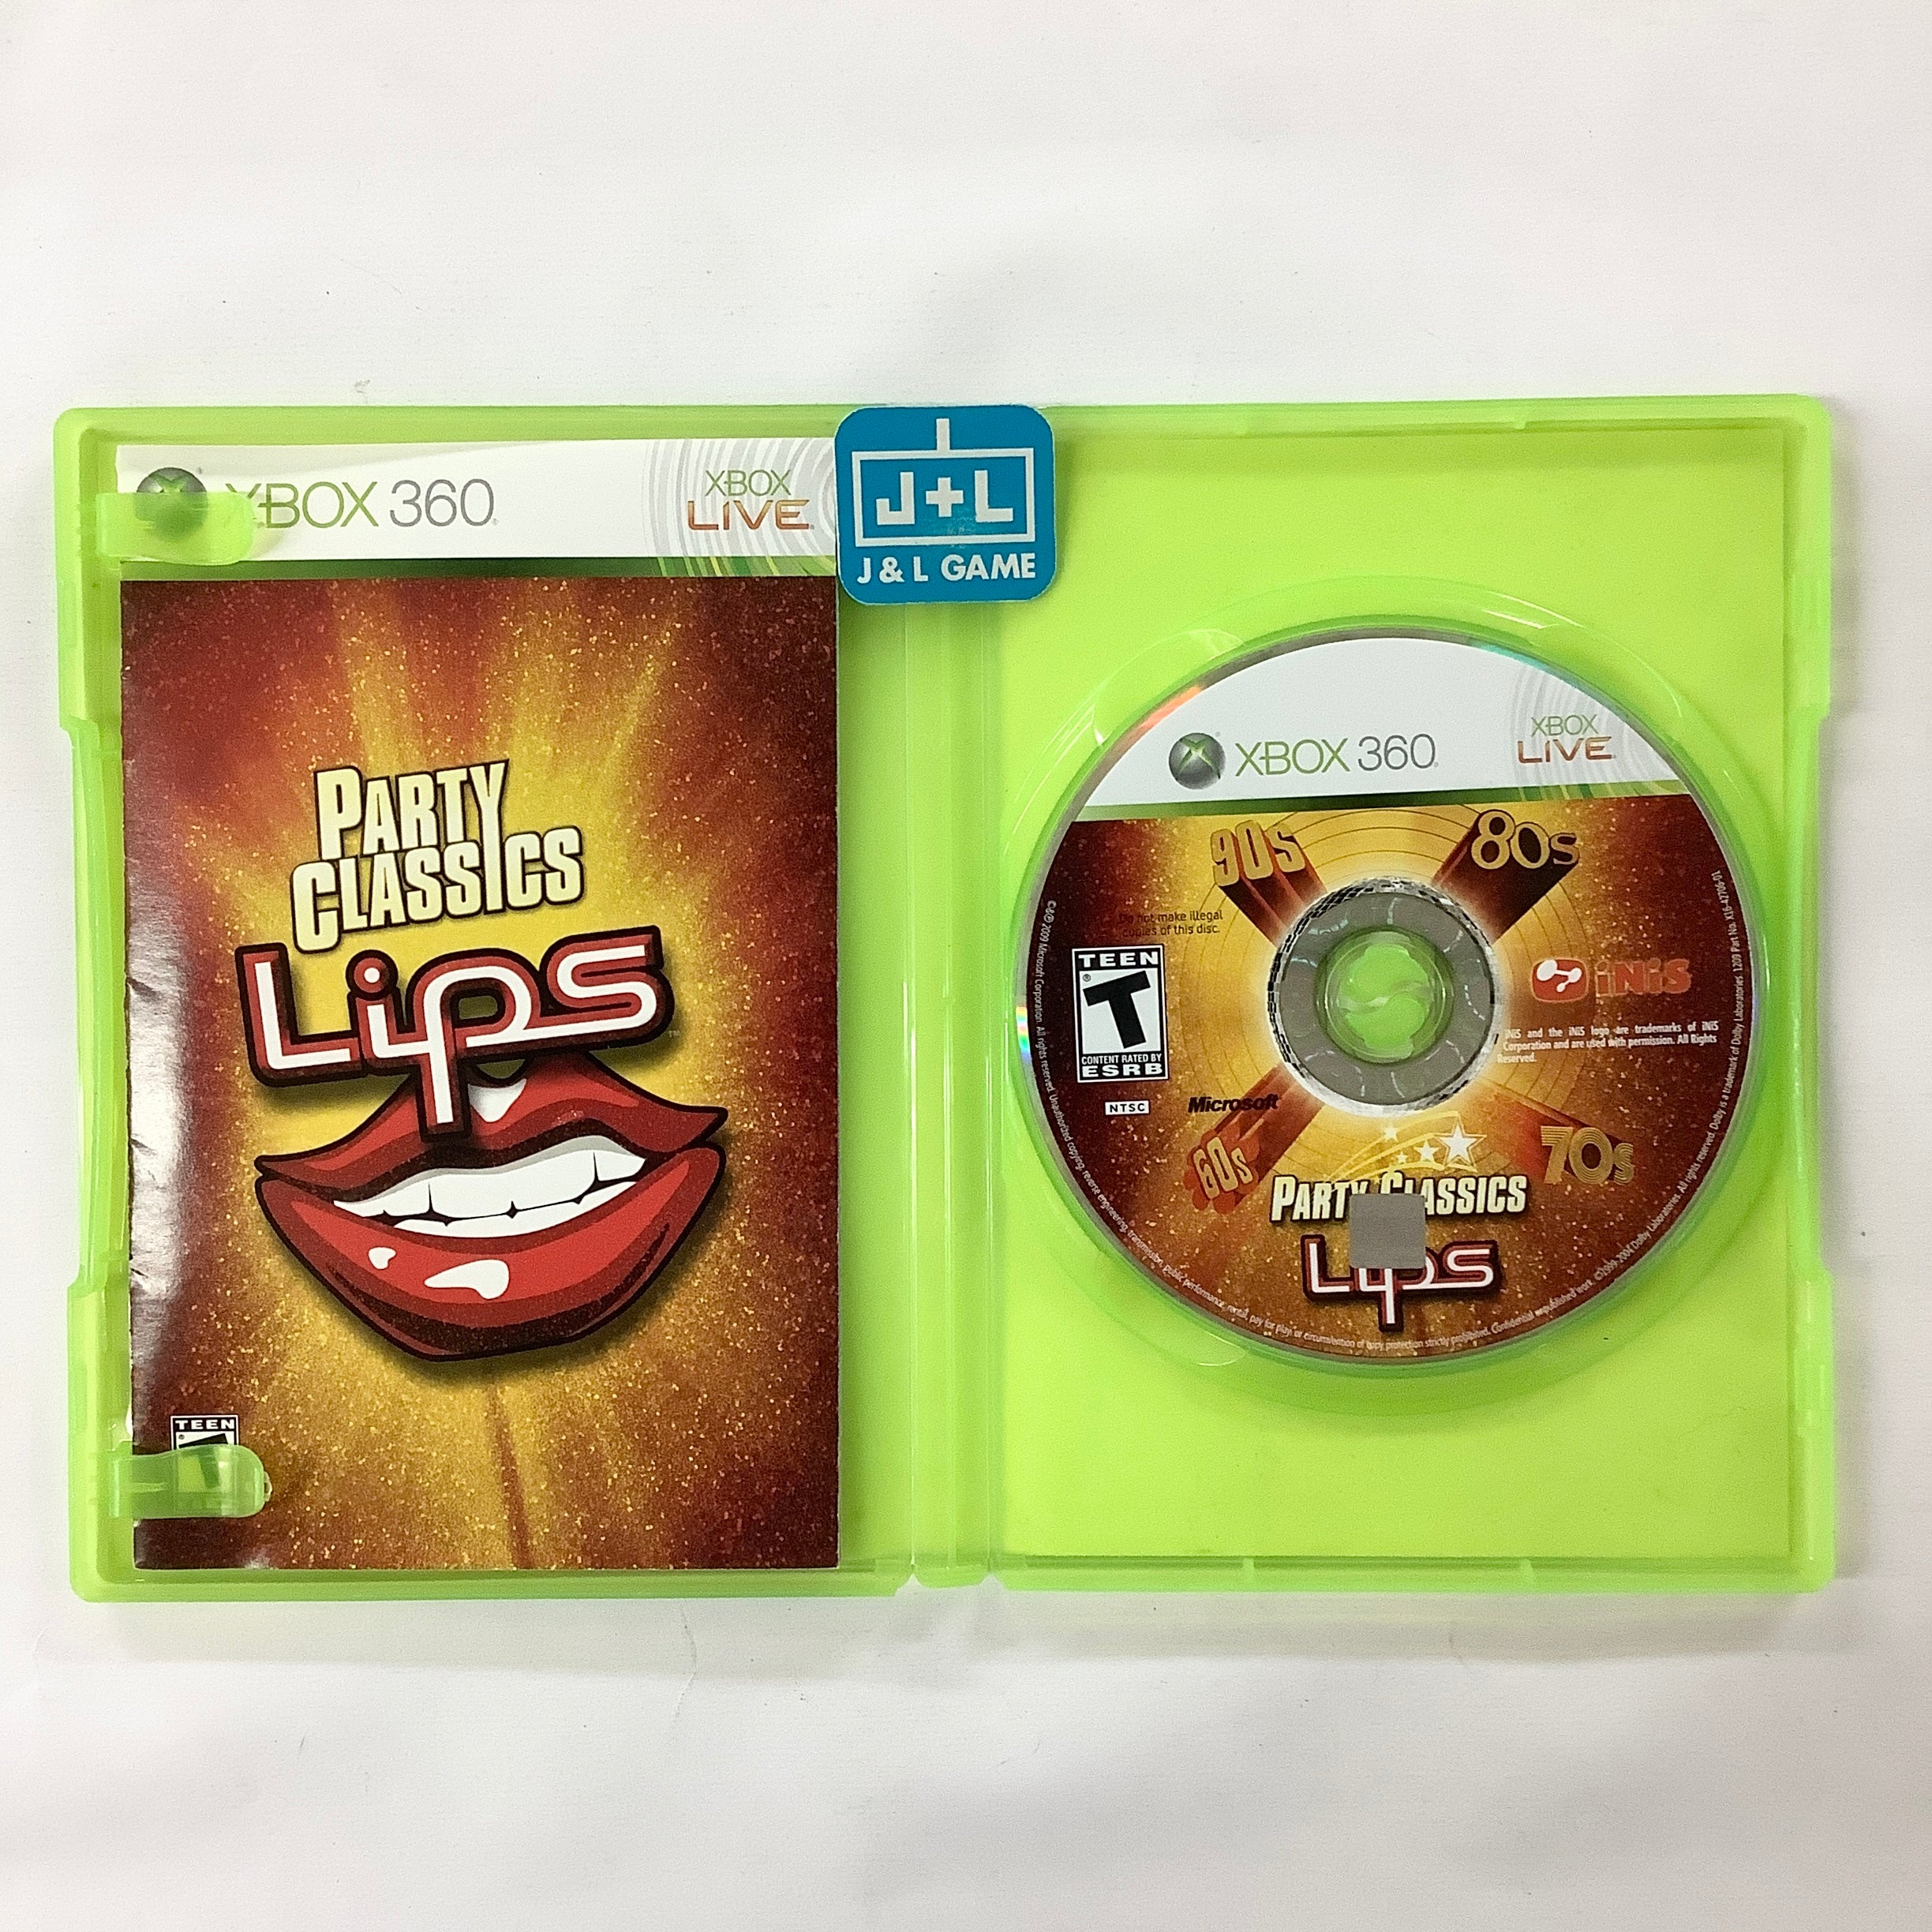 Lips: Party Classics - Xbox 360 [Pre-Owned] Video Games Microsoft Game Studios   